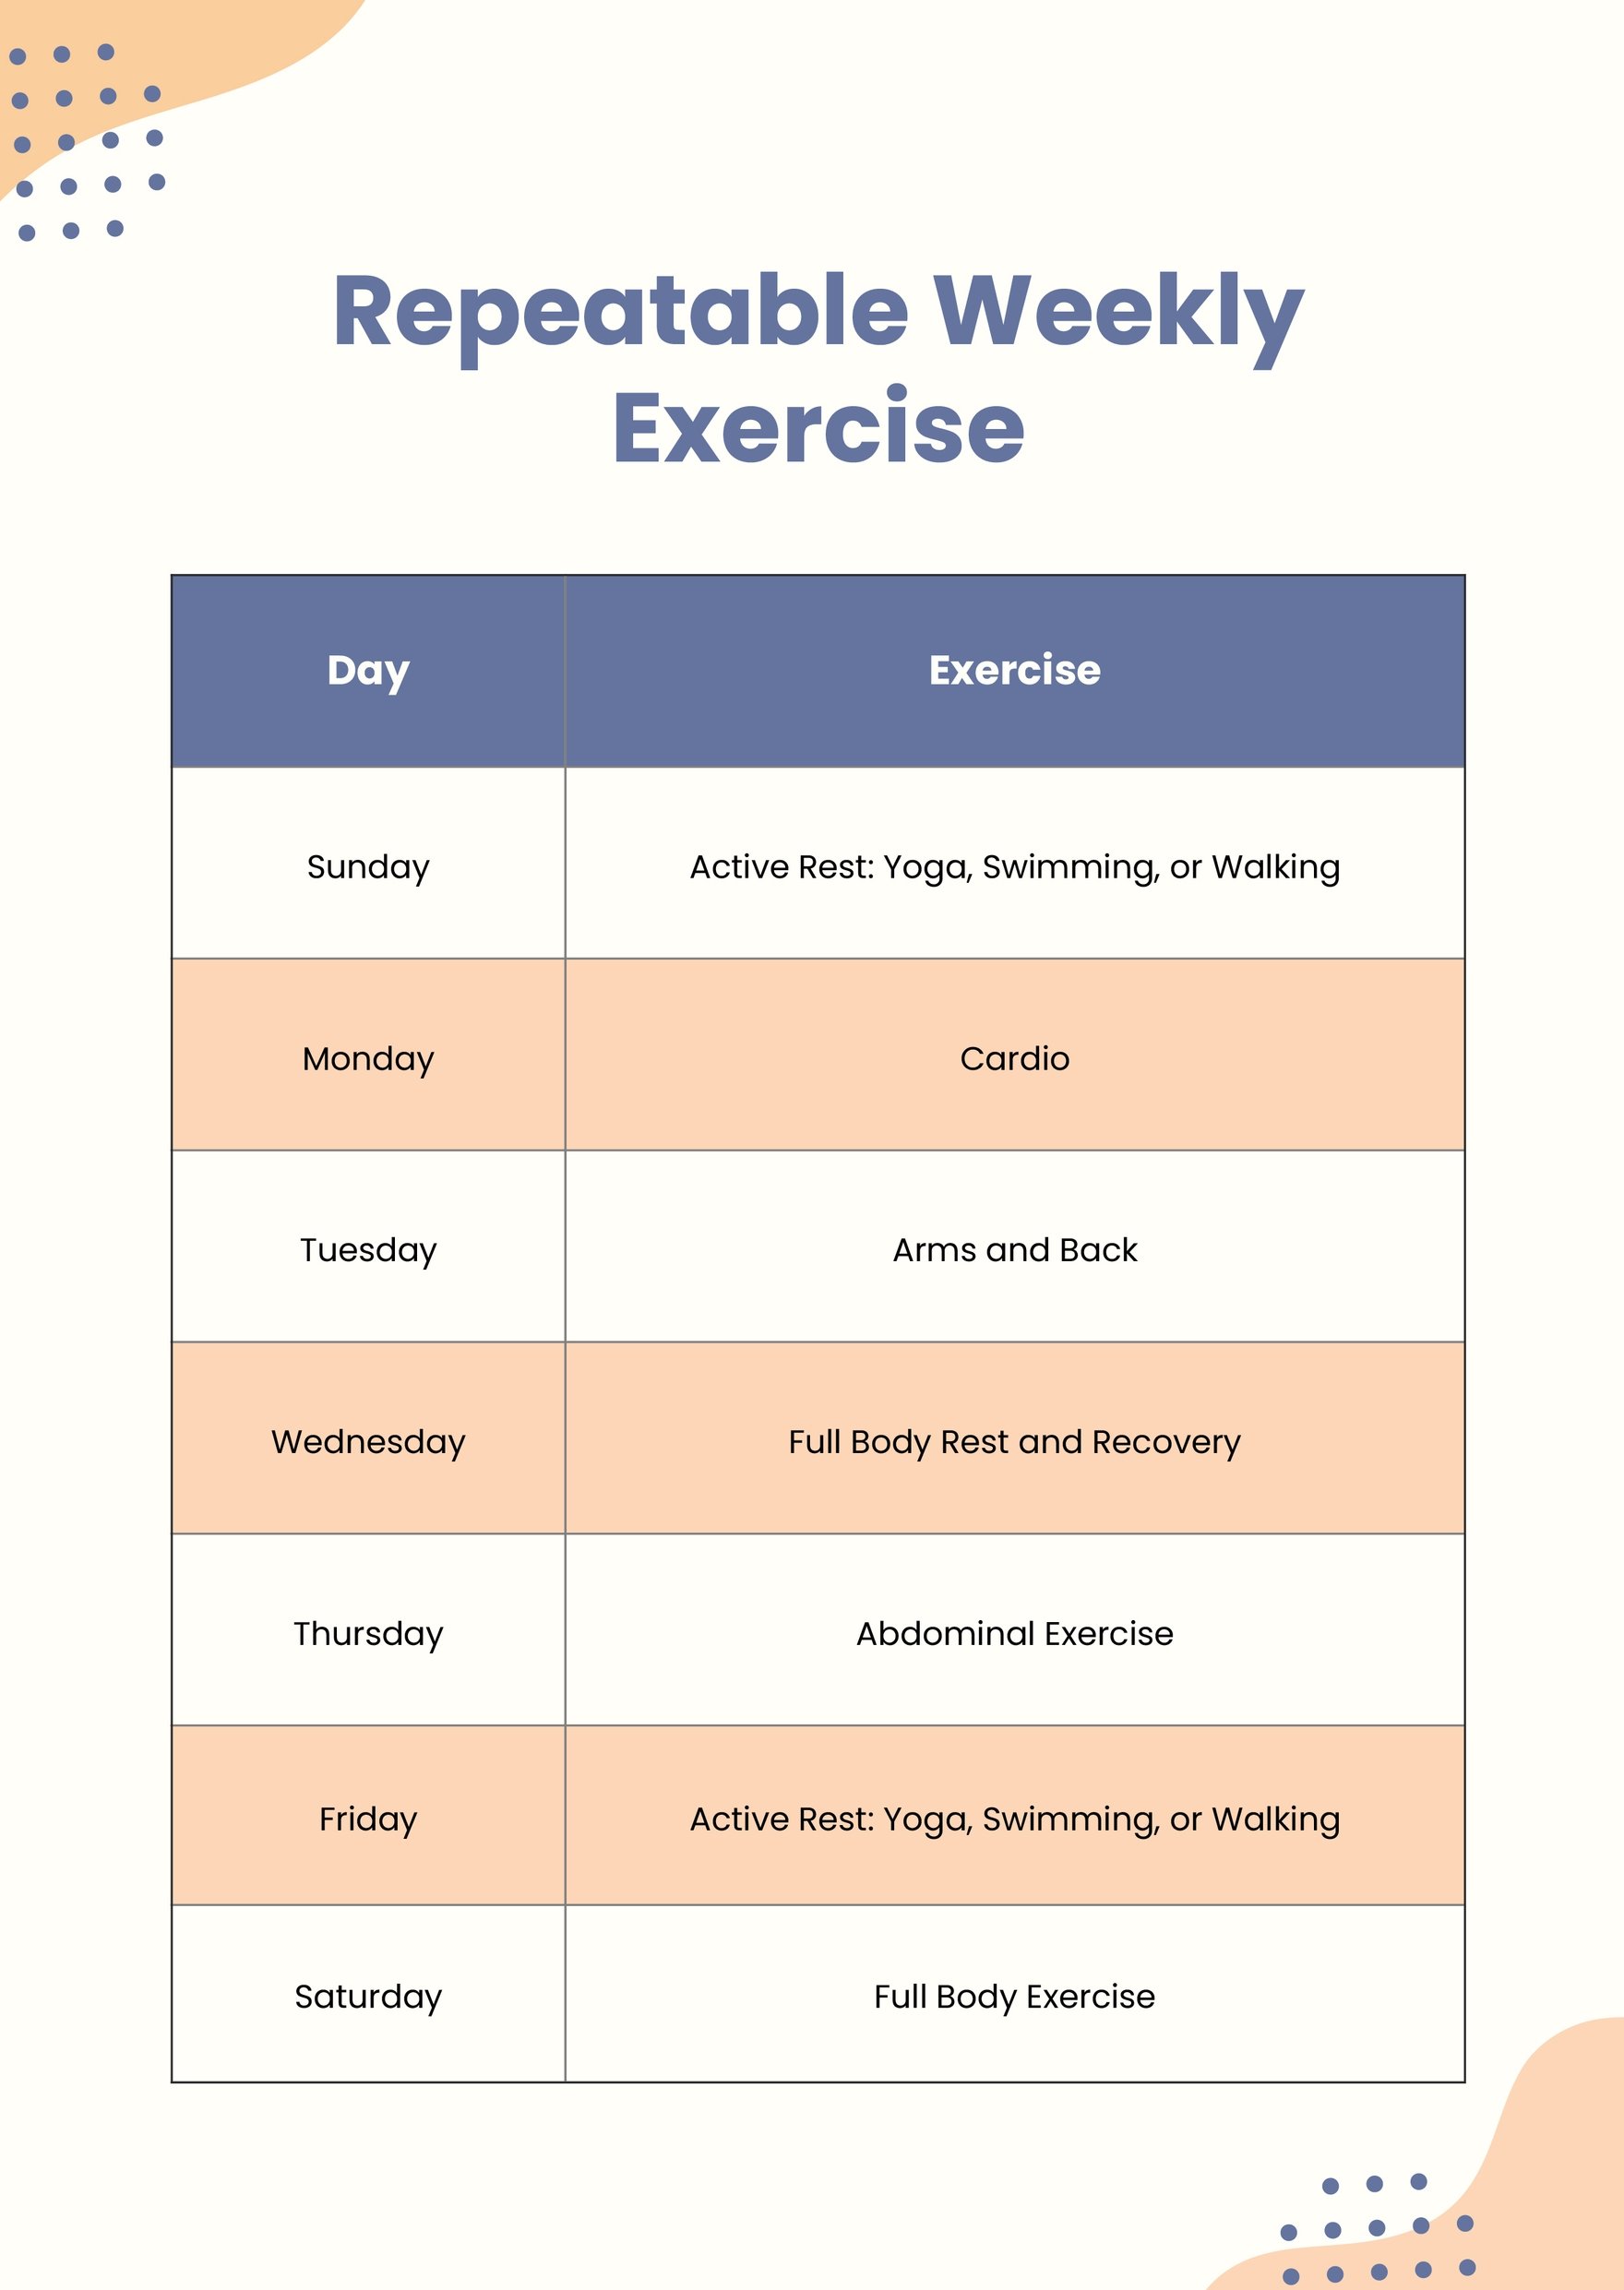 Weekly Exercise Chart in PDF, Illustrator